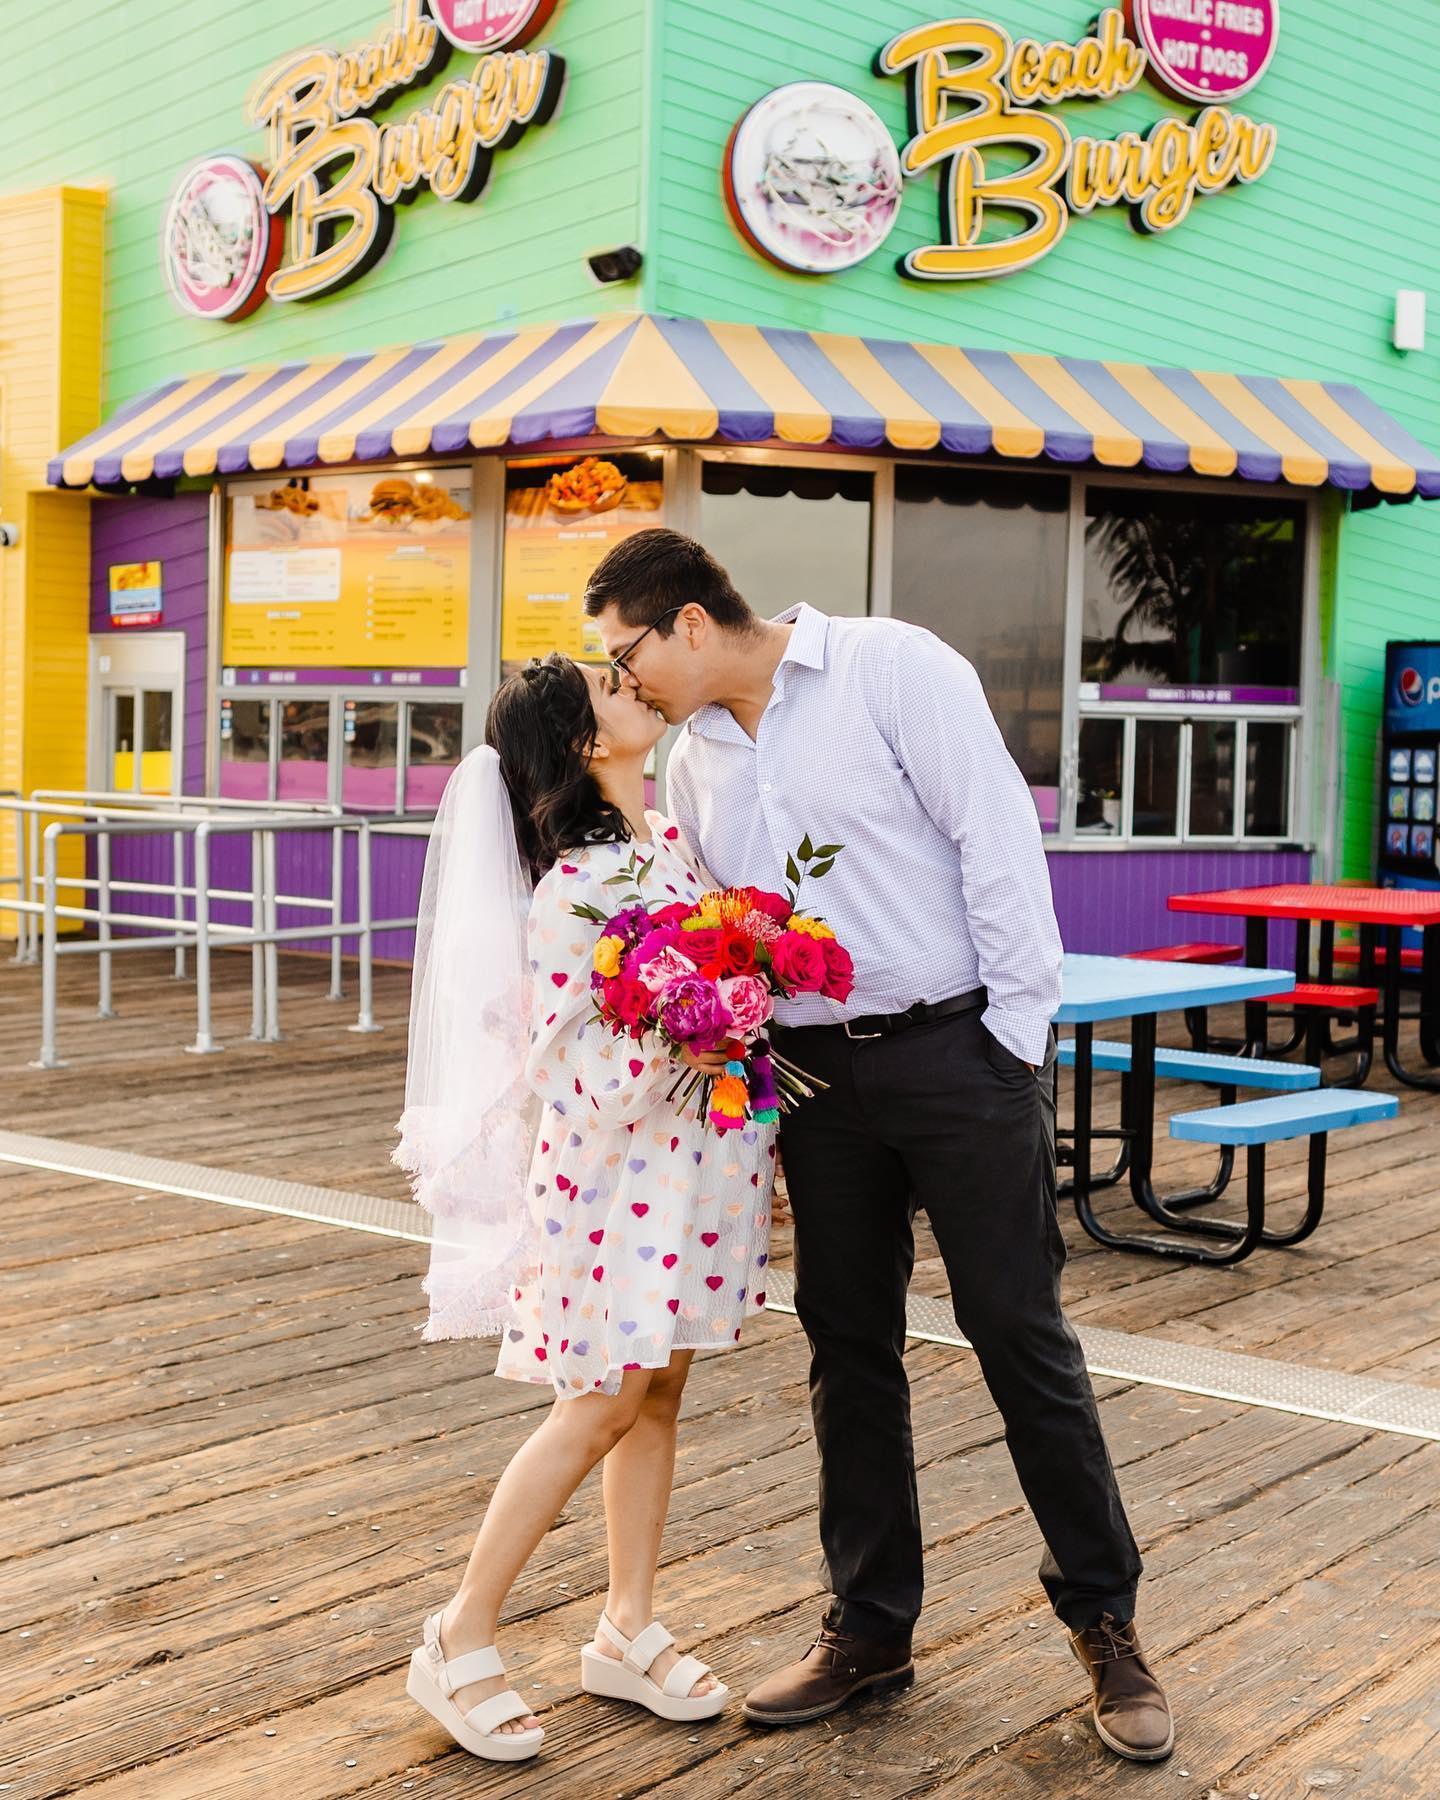 #FunFactFriday: Pacific Park is the ideal romantic backdrop with  fun colors and beach vibes. ✨🌅💕  Congratulations to these two on their beautiful elopement! 💍🎉  📸: @tminspired
.
.
.
#santamonica #santamonicapier #pacpark #pacificpark #facts #southerncaliforniaphotographer #socalwedding #wedding #weddingphotography #weddinginspiration #weddingideas